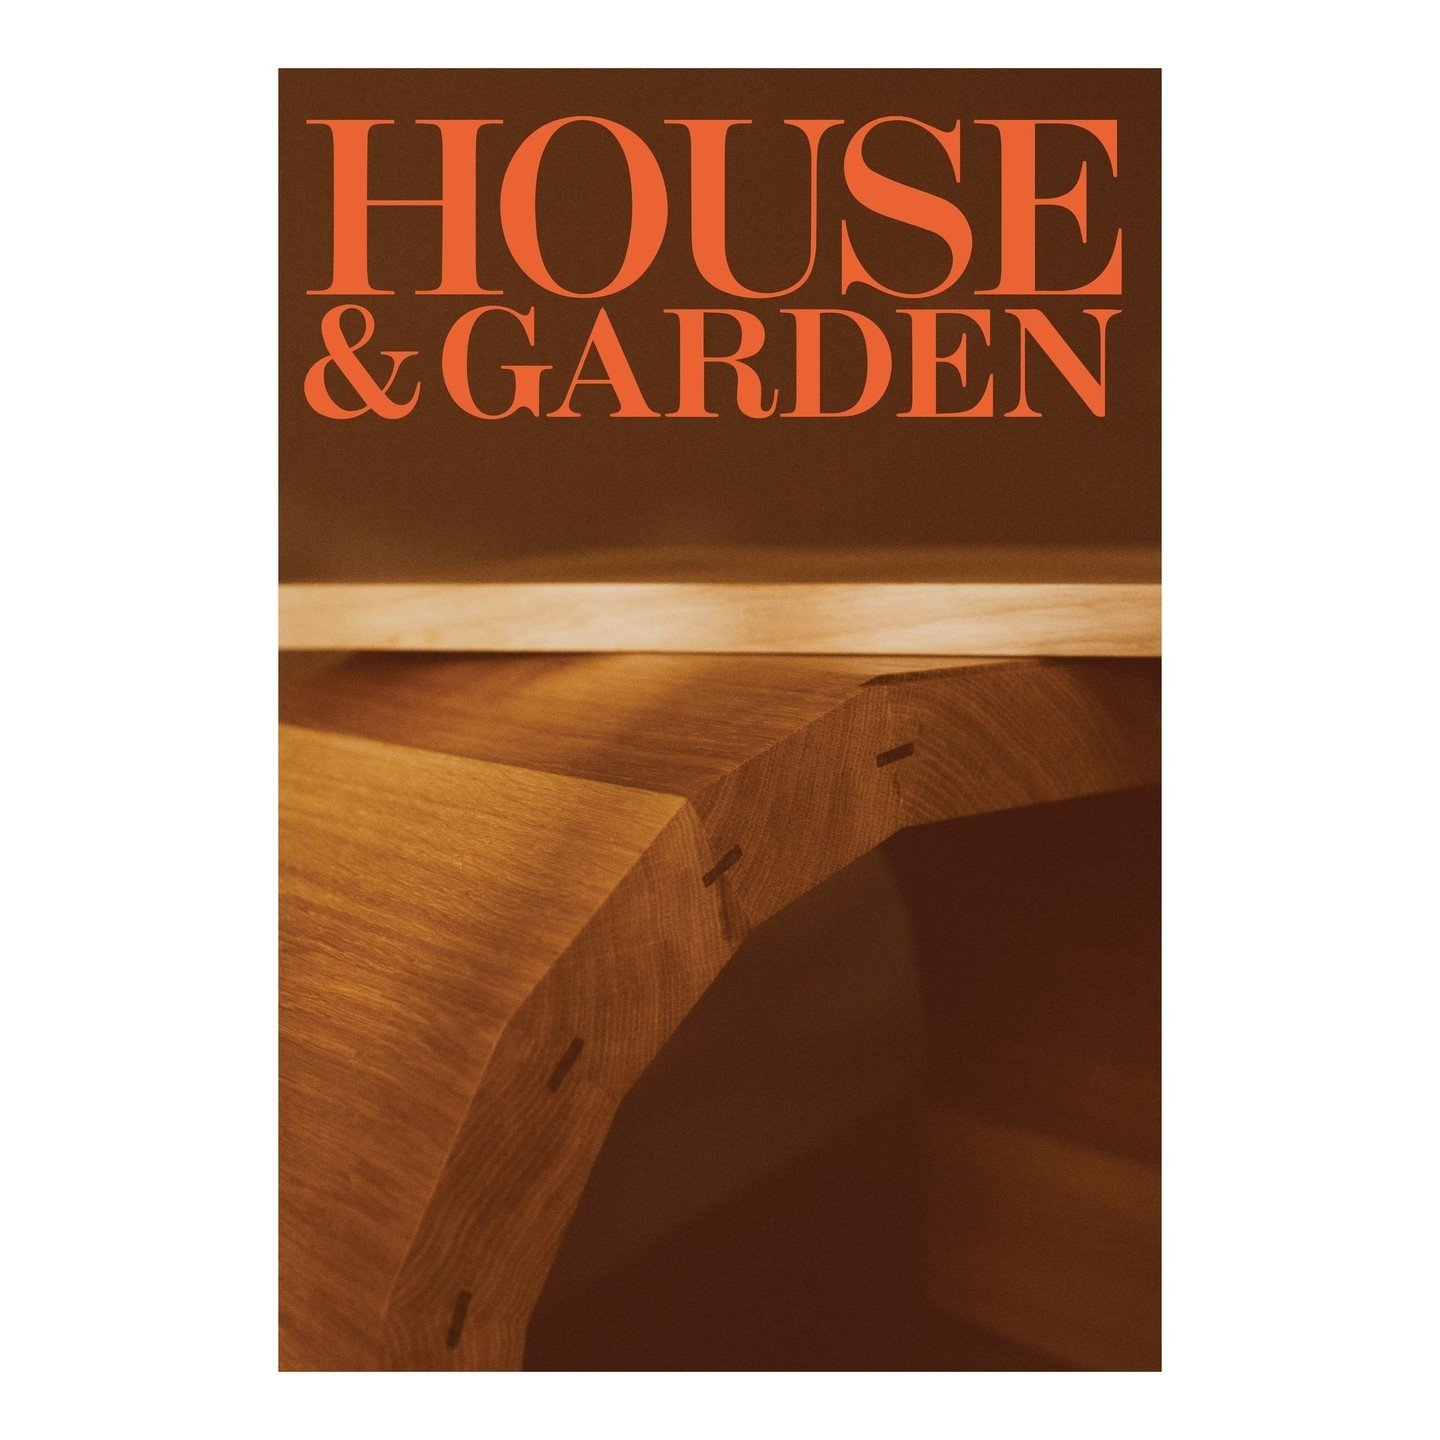 House &amp; Gardens - Junes Issue⁠
⁠
Great to be apart of another Magazine to be featured in the Makers &amp; Creators.⁠
⁠
Archie is now available to buy online at www.gigicooke.com (linking bio) or in Holloways of Ludlows showroom in Bath.⁠
⁠
📖 @Ho